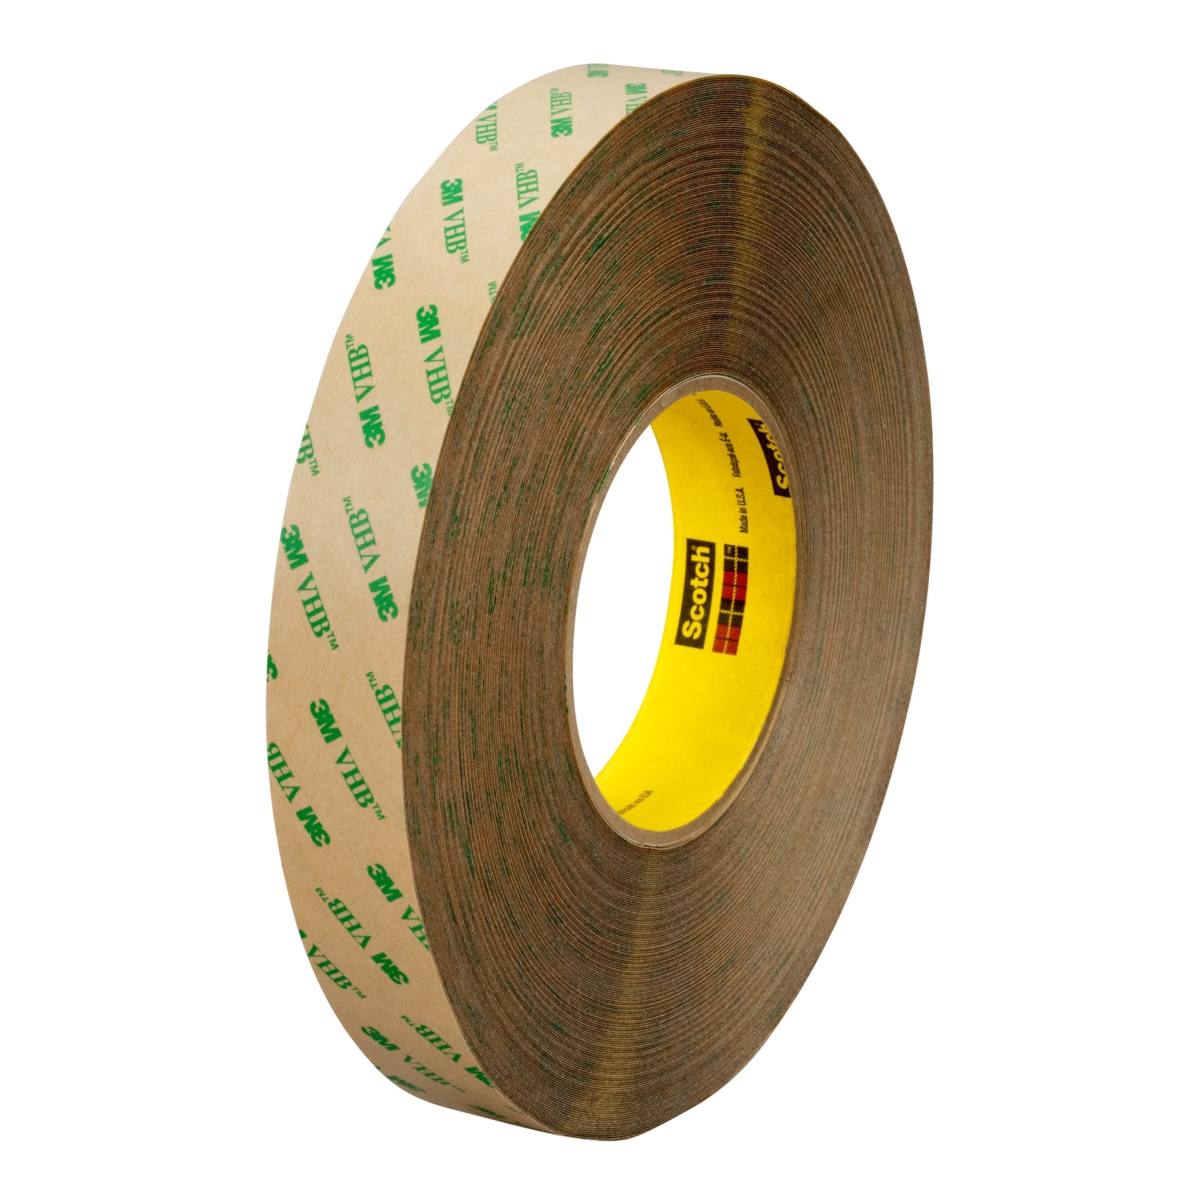 3M Transfer tape F9473PC without 3M logo, transparent, 610 mm x 55 m, 0.25 mm